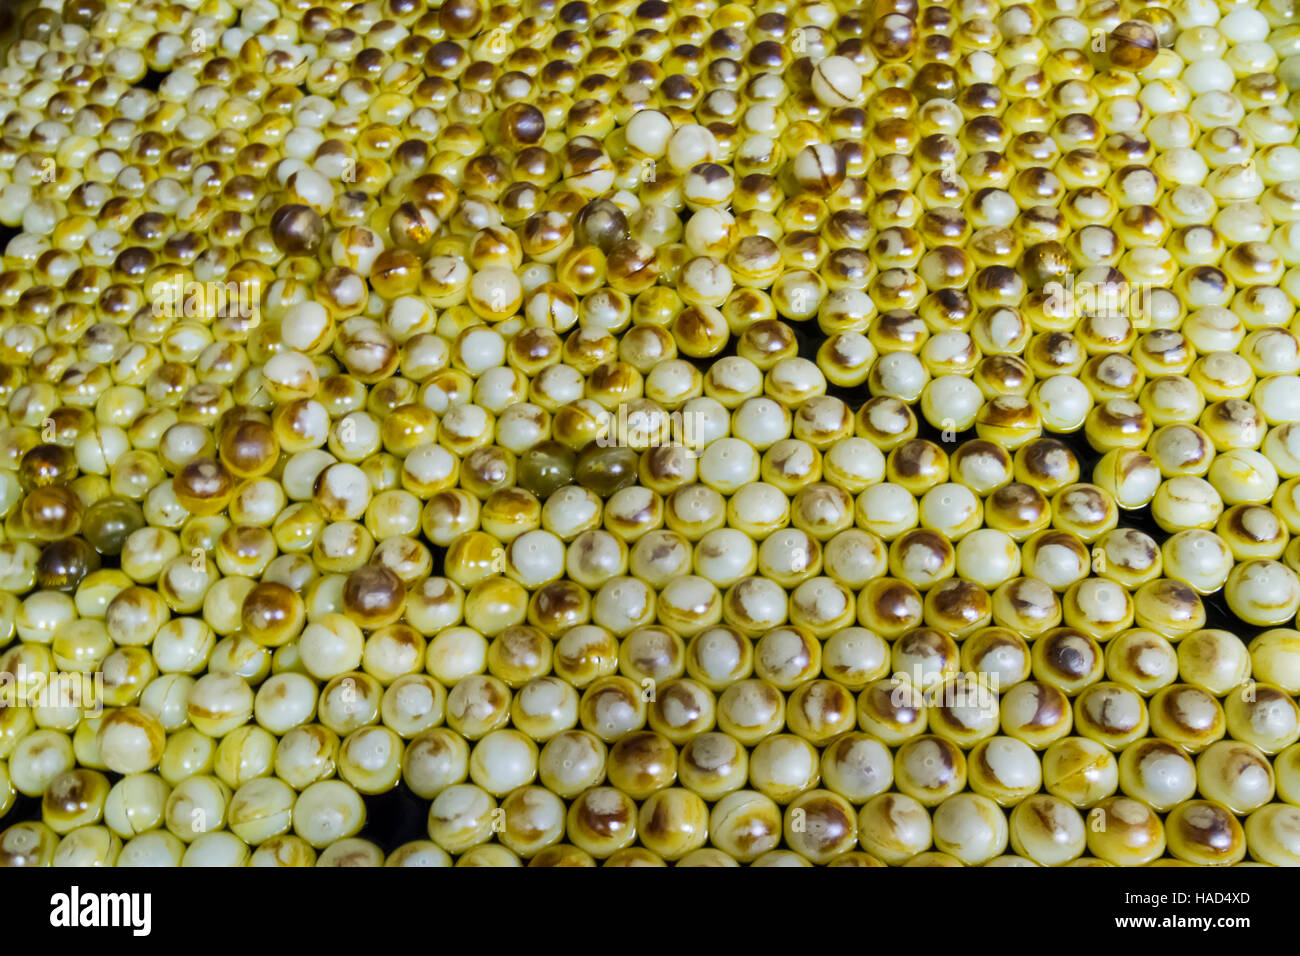 Ping pong balls floating in acid bath. Stock Photo